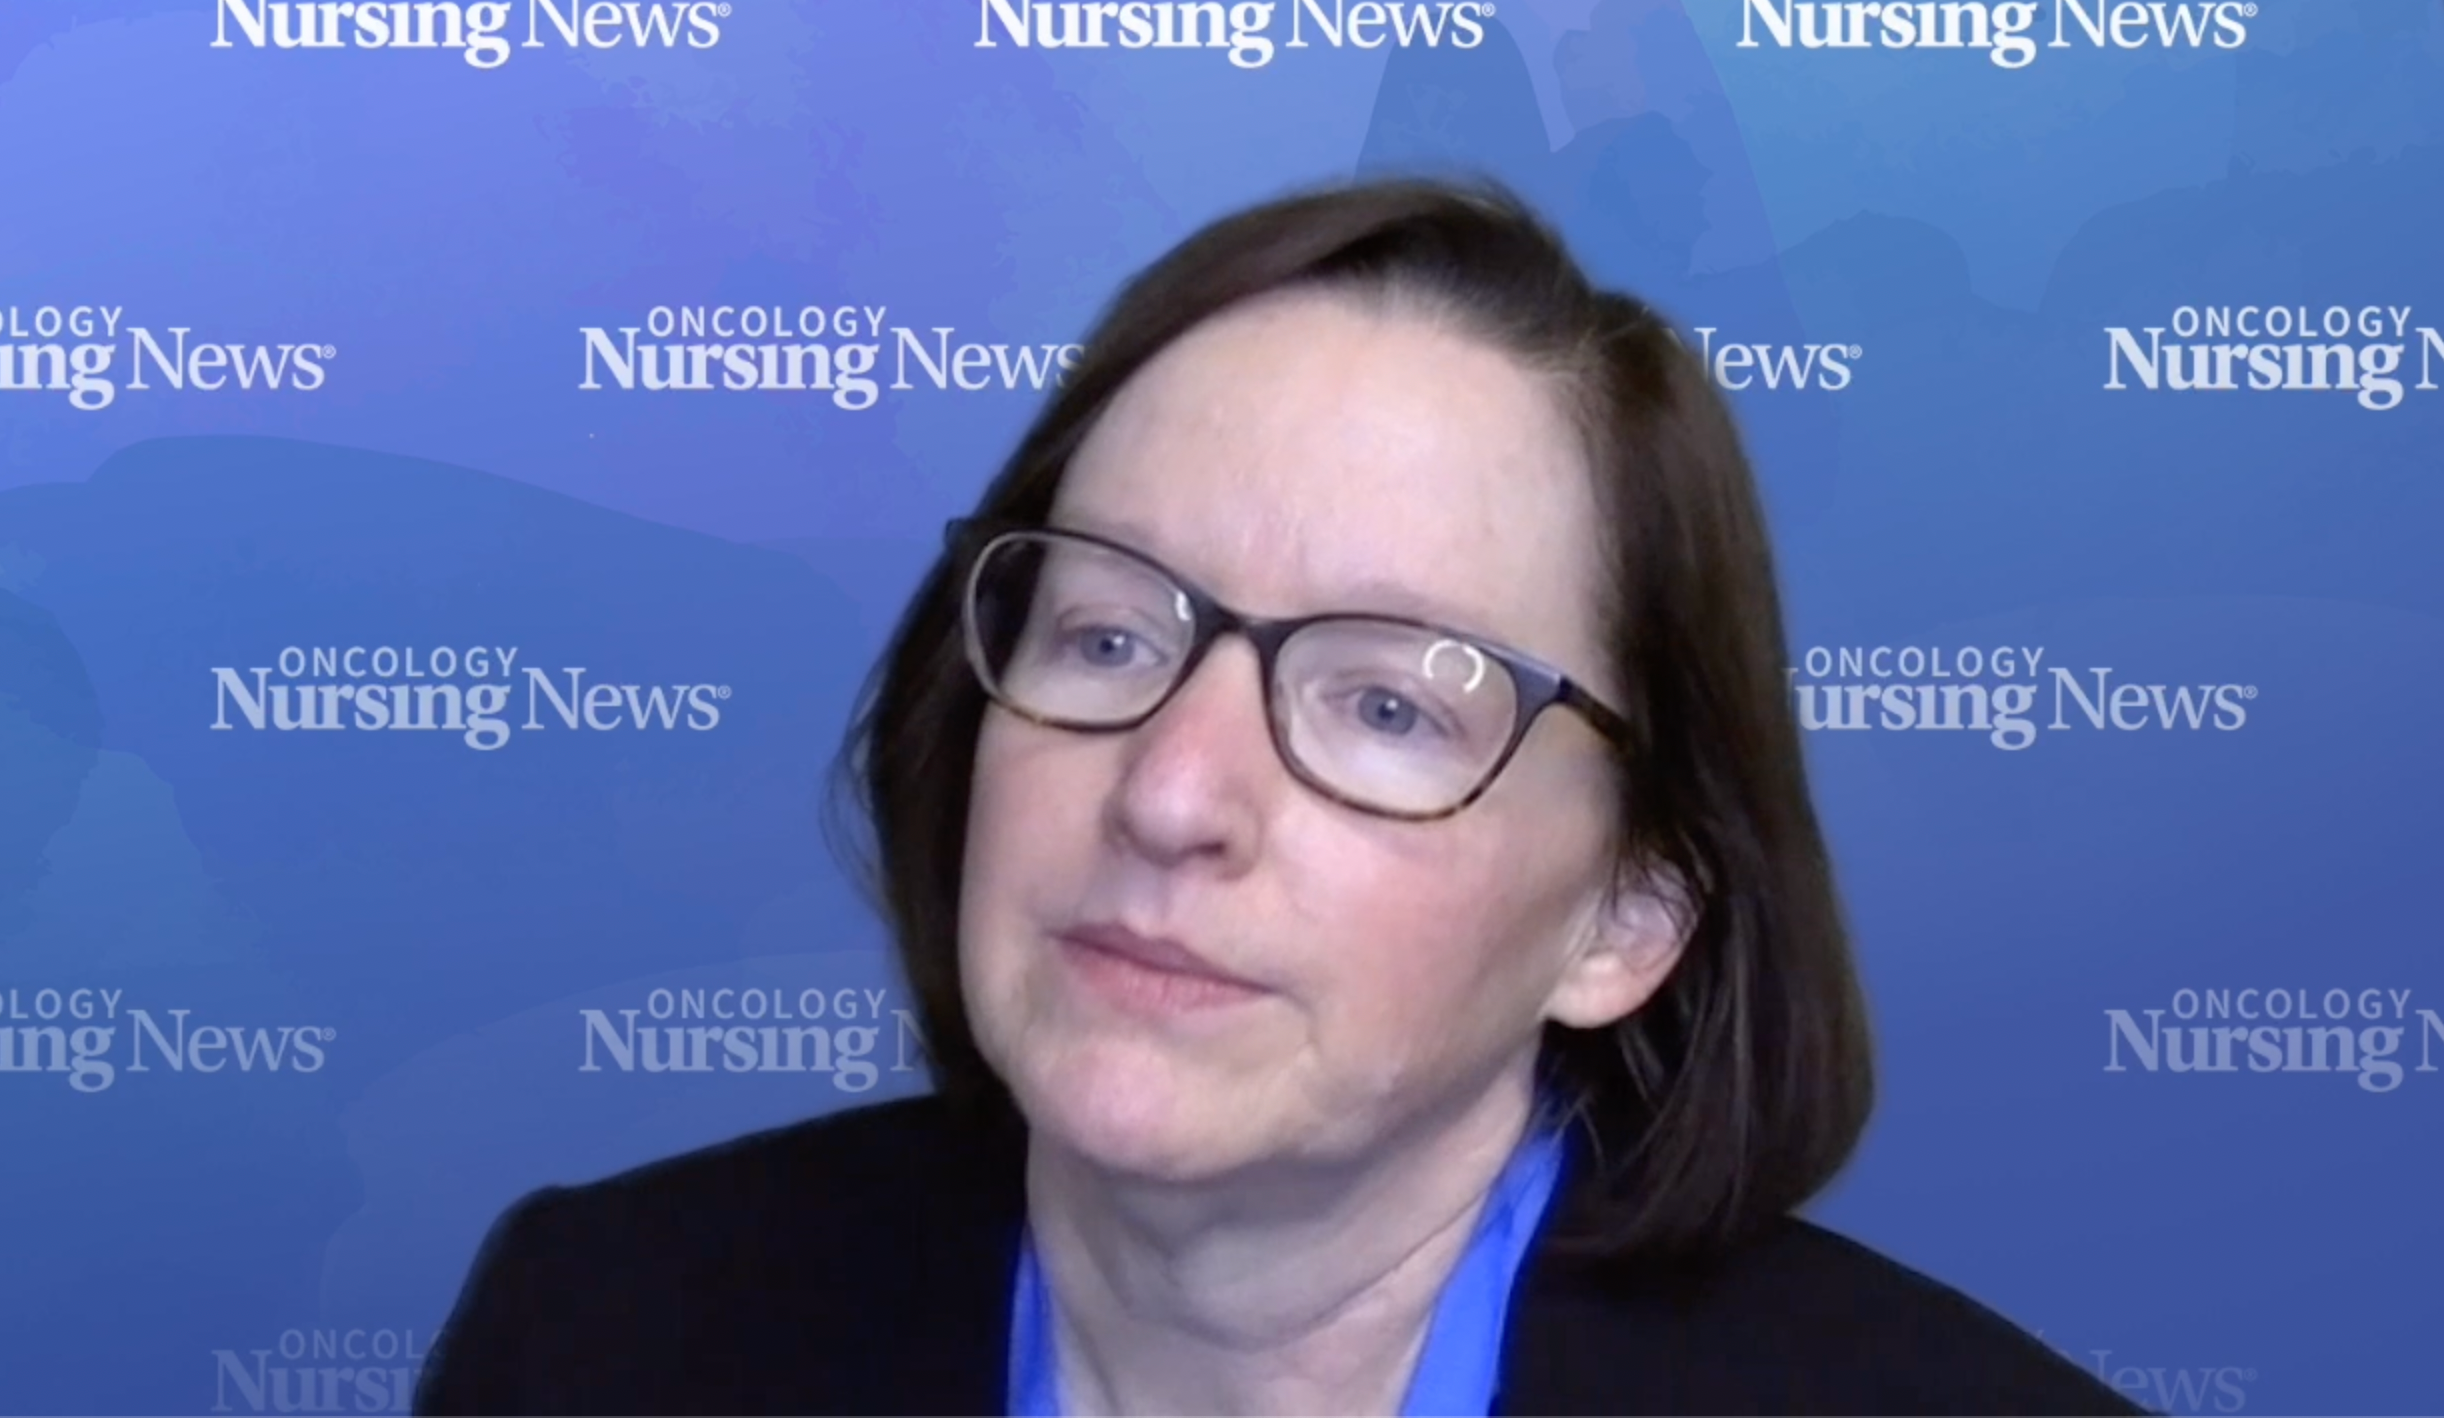 Helping Patients Navigate a New Diagnosis of CML